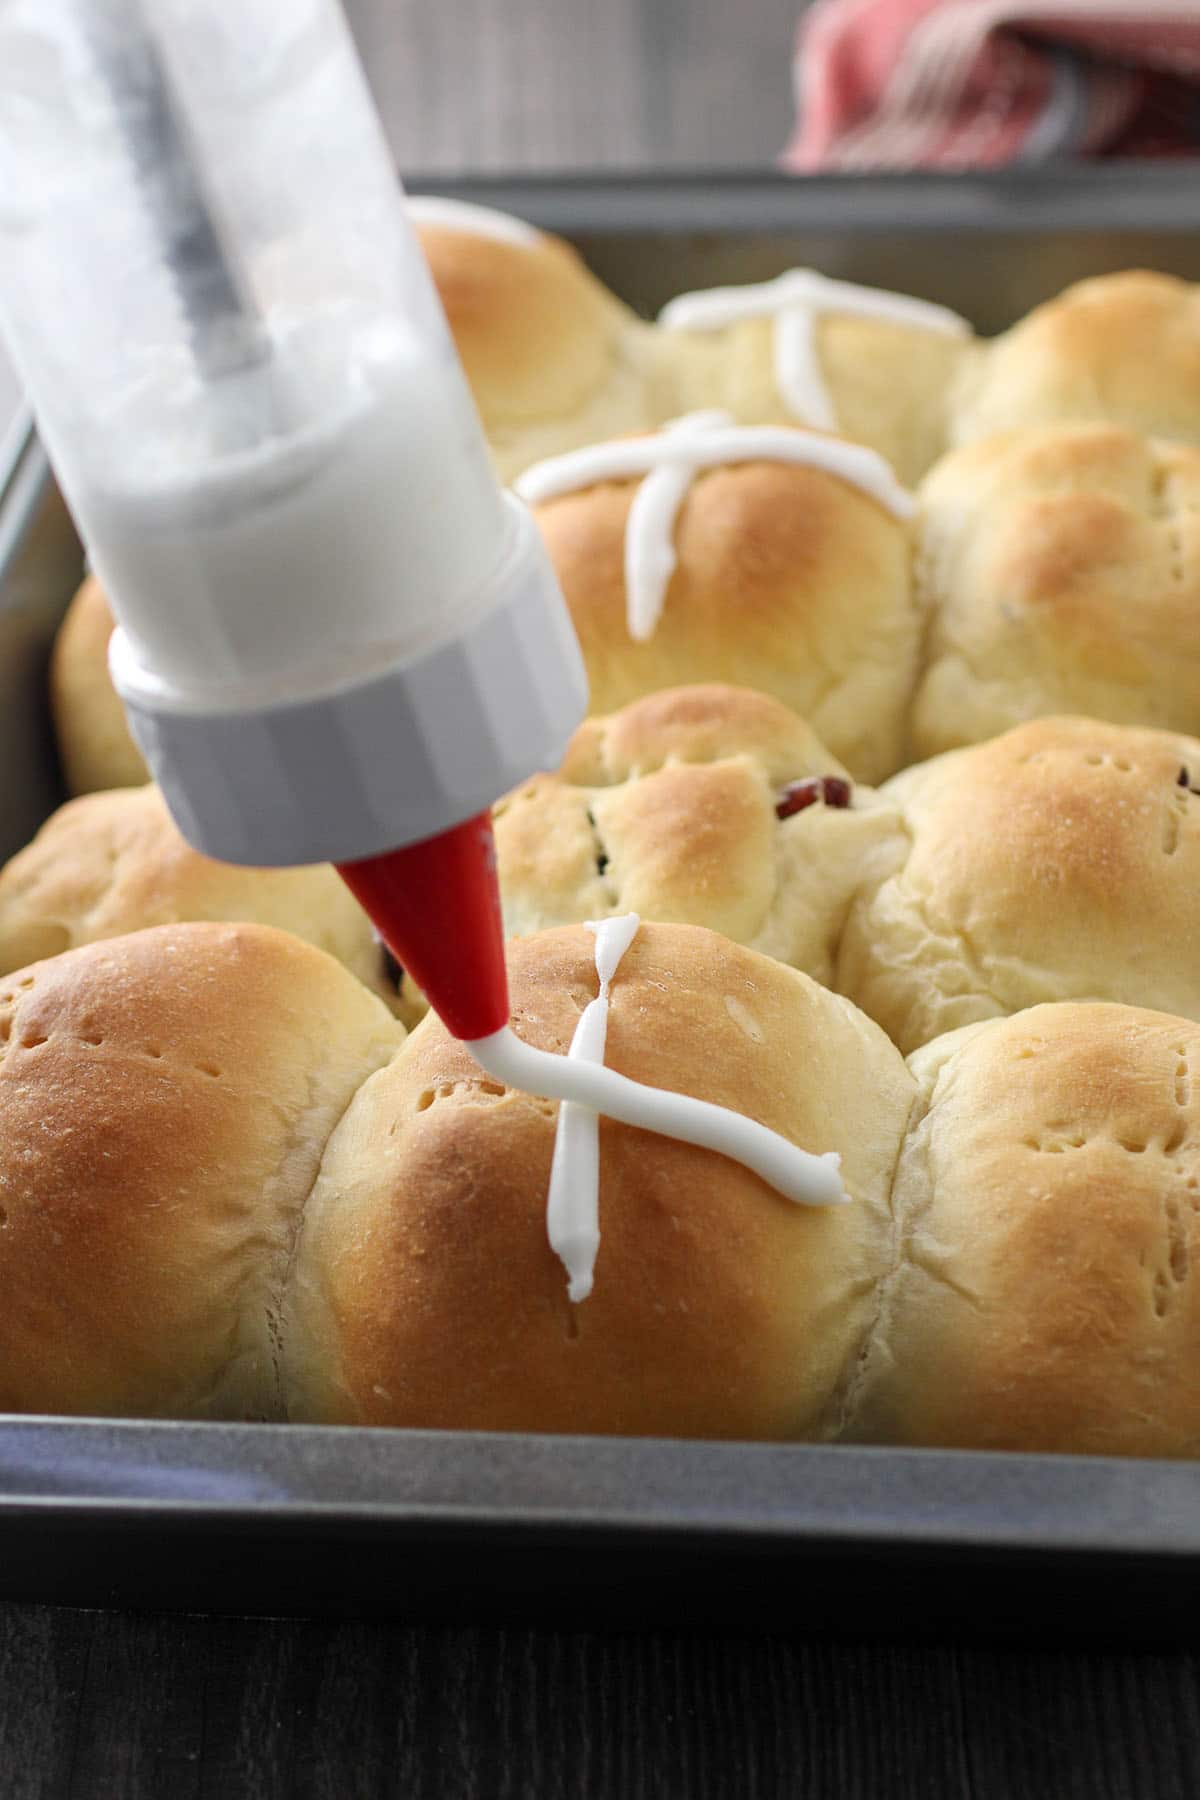 Piping the cross icing into the hot cross buns.